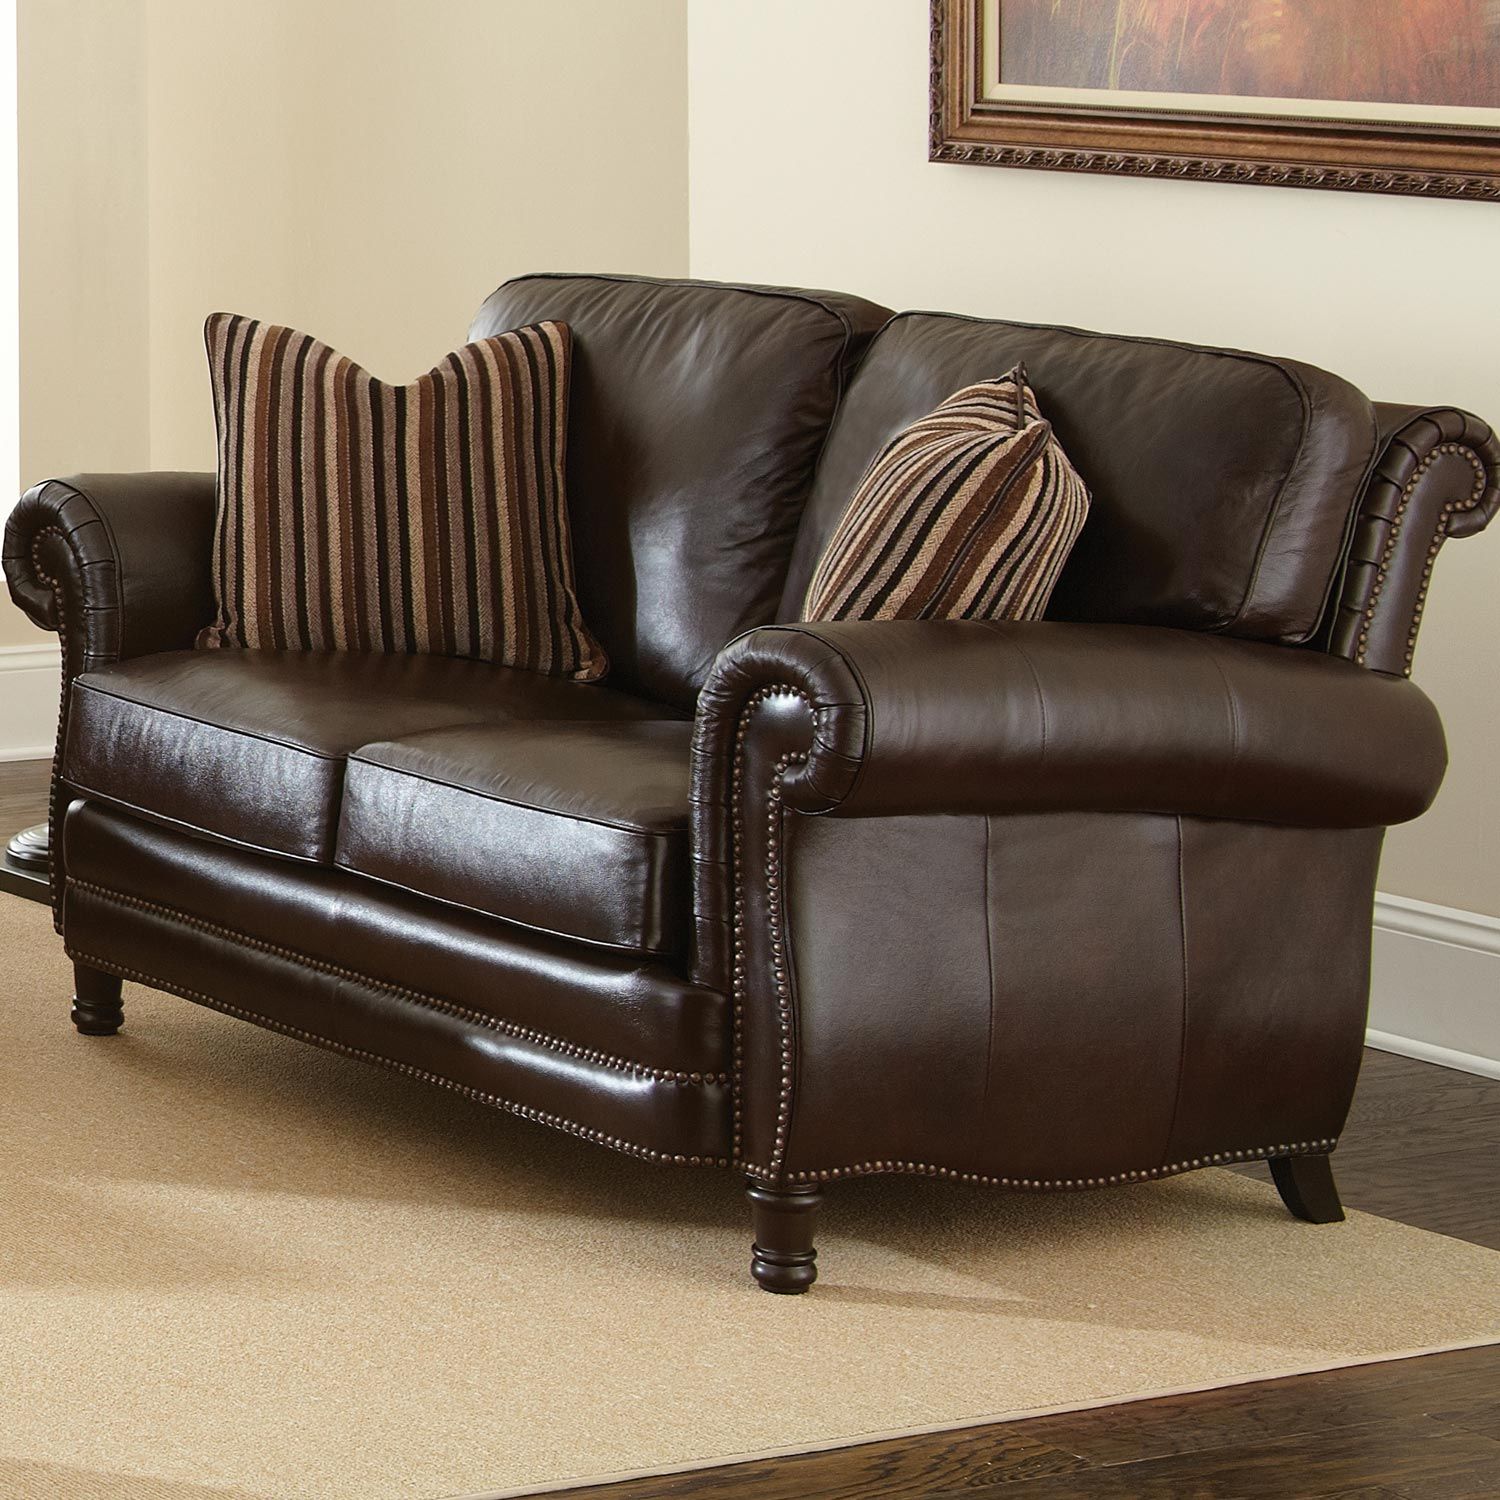 Featured Photo of 20 Ideas of Sofas in Chocolate Brown